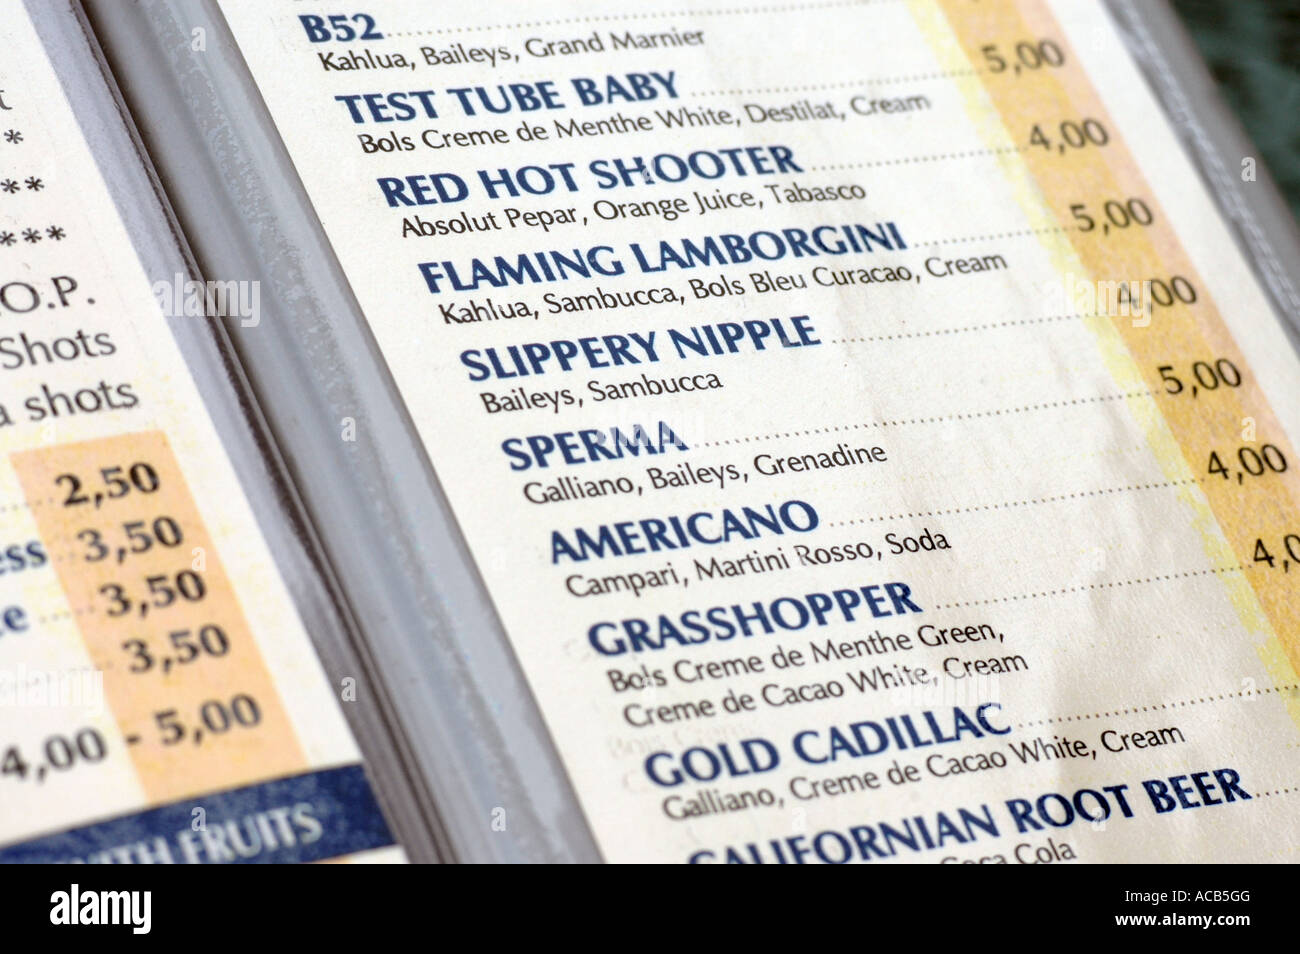 Menu with list of drinks and prices in euro currency Stock Photo: 13100943 - Alamy